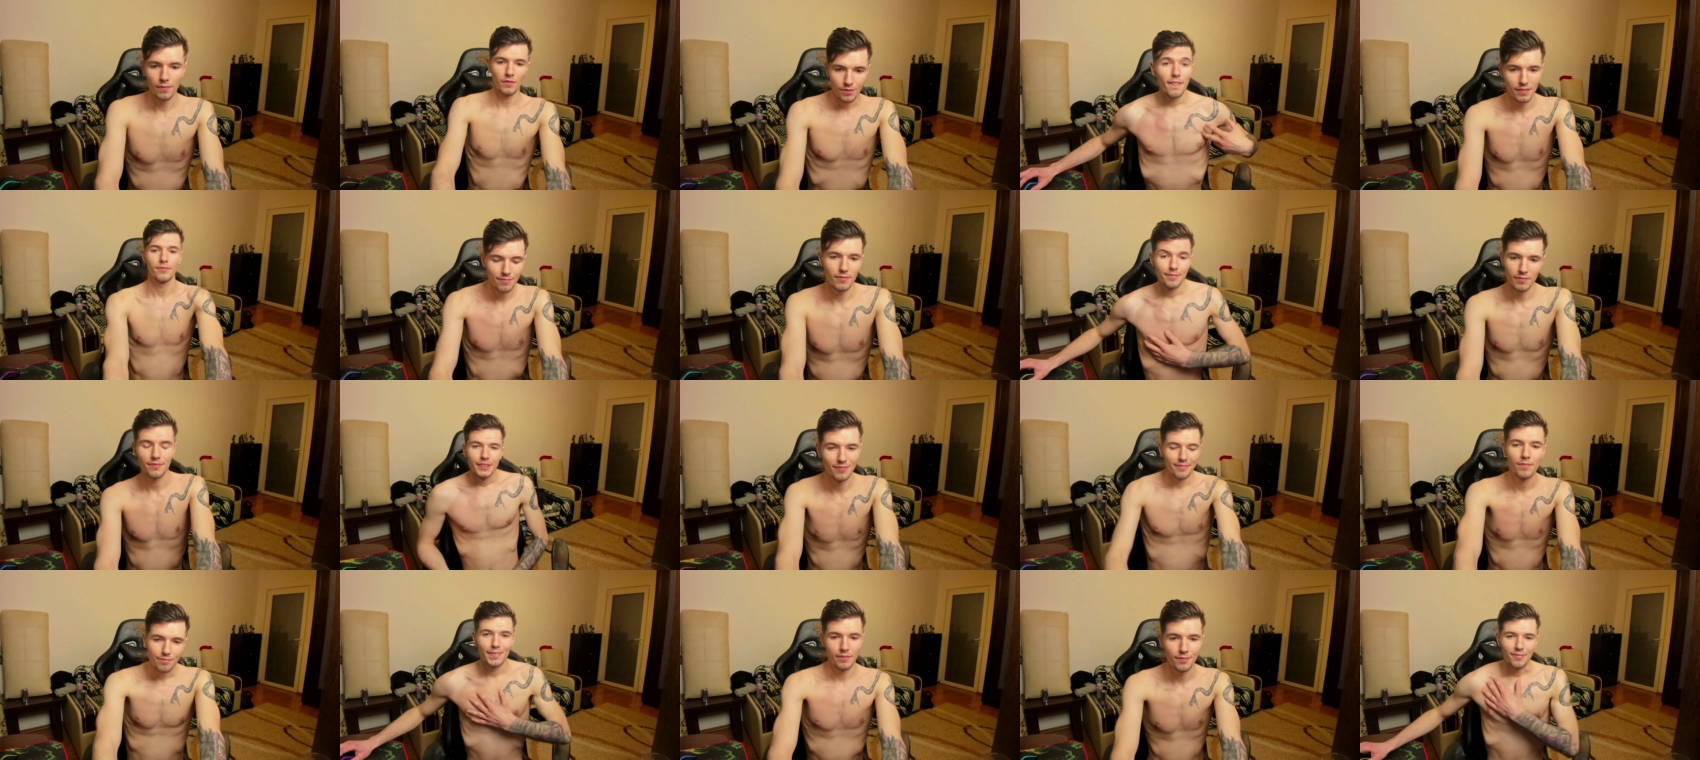 awesome_justin toy CAM SHOW @ Chaturbate 29-12-2021